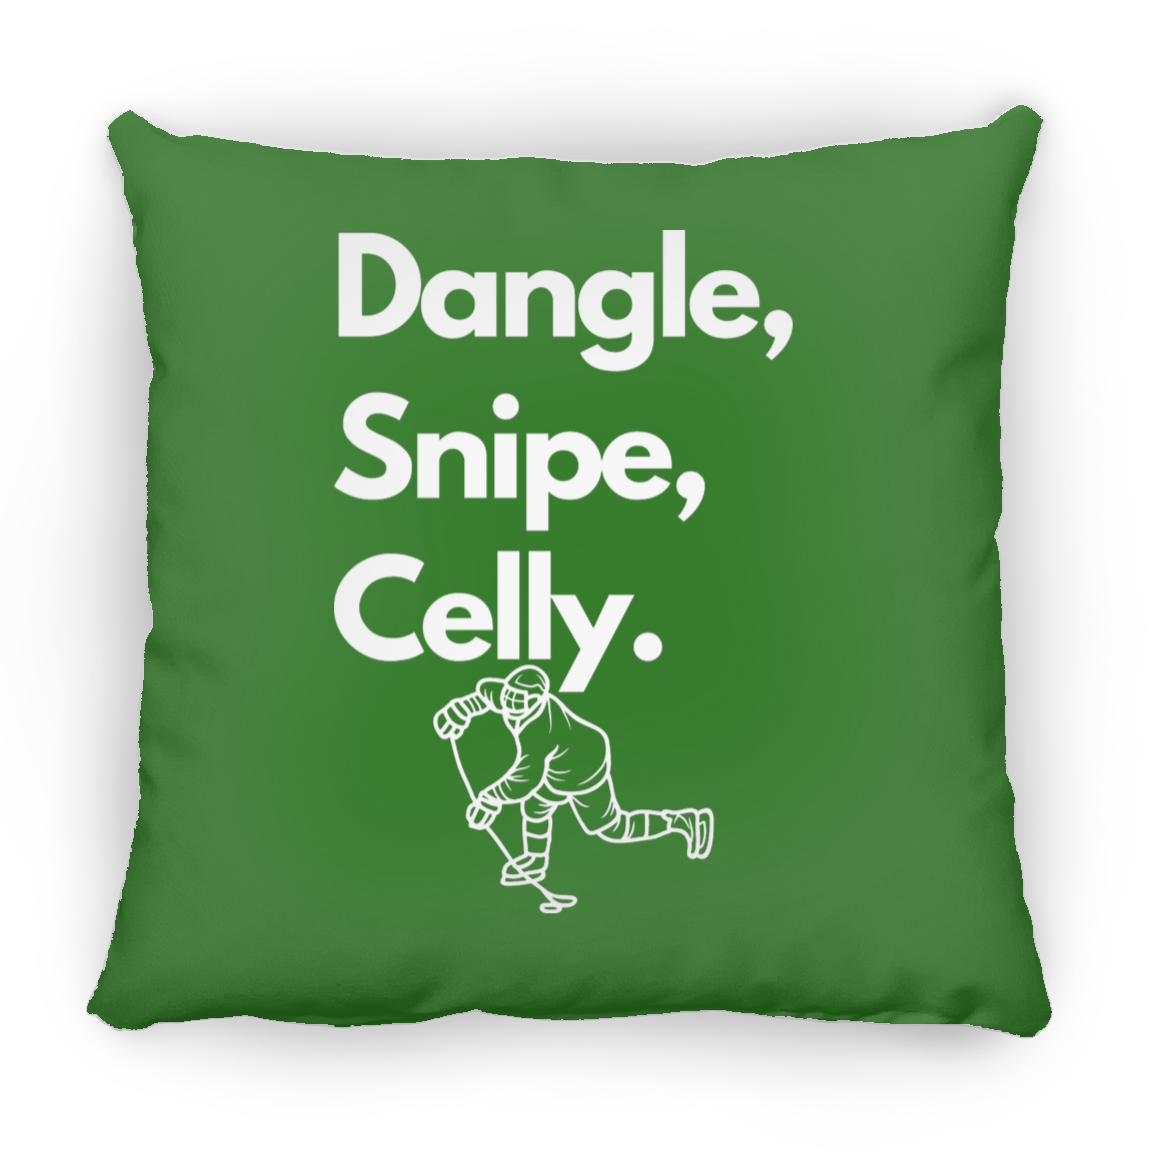 Dangle Snipe Celly- Large Square Pillow